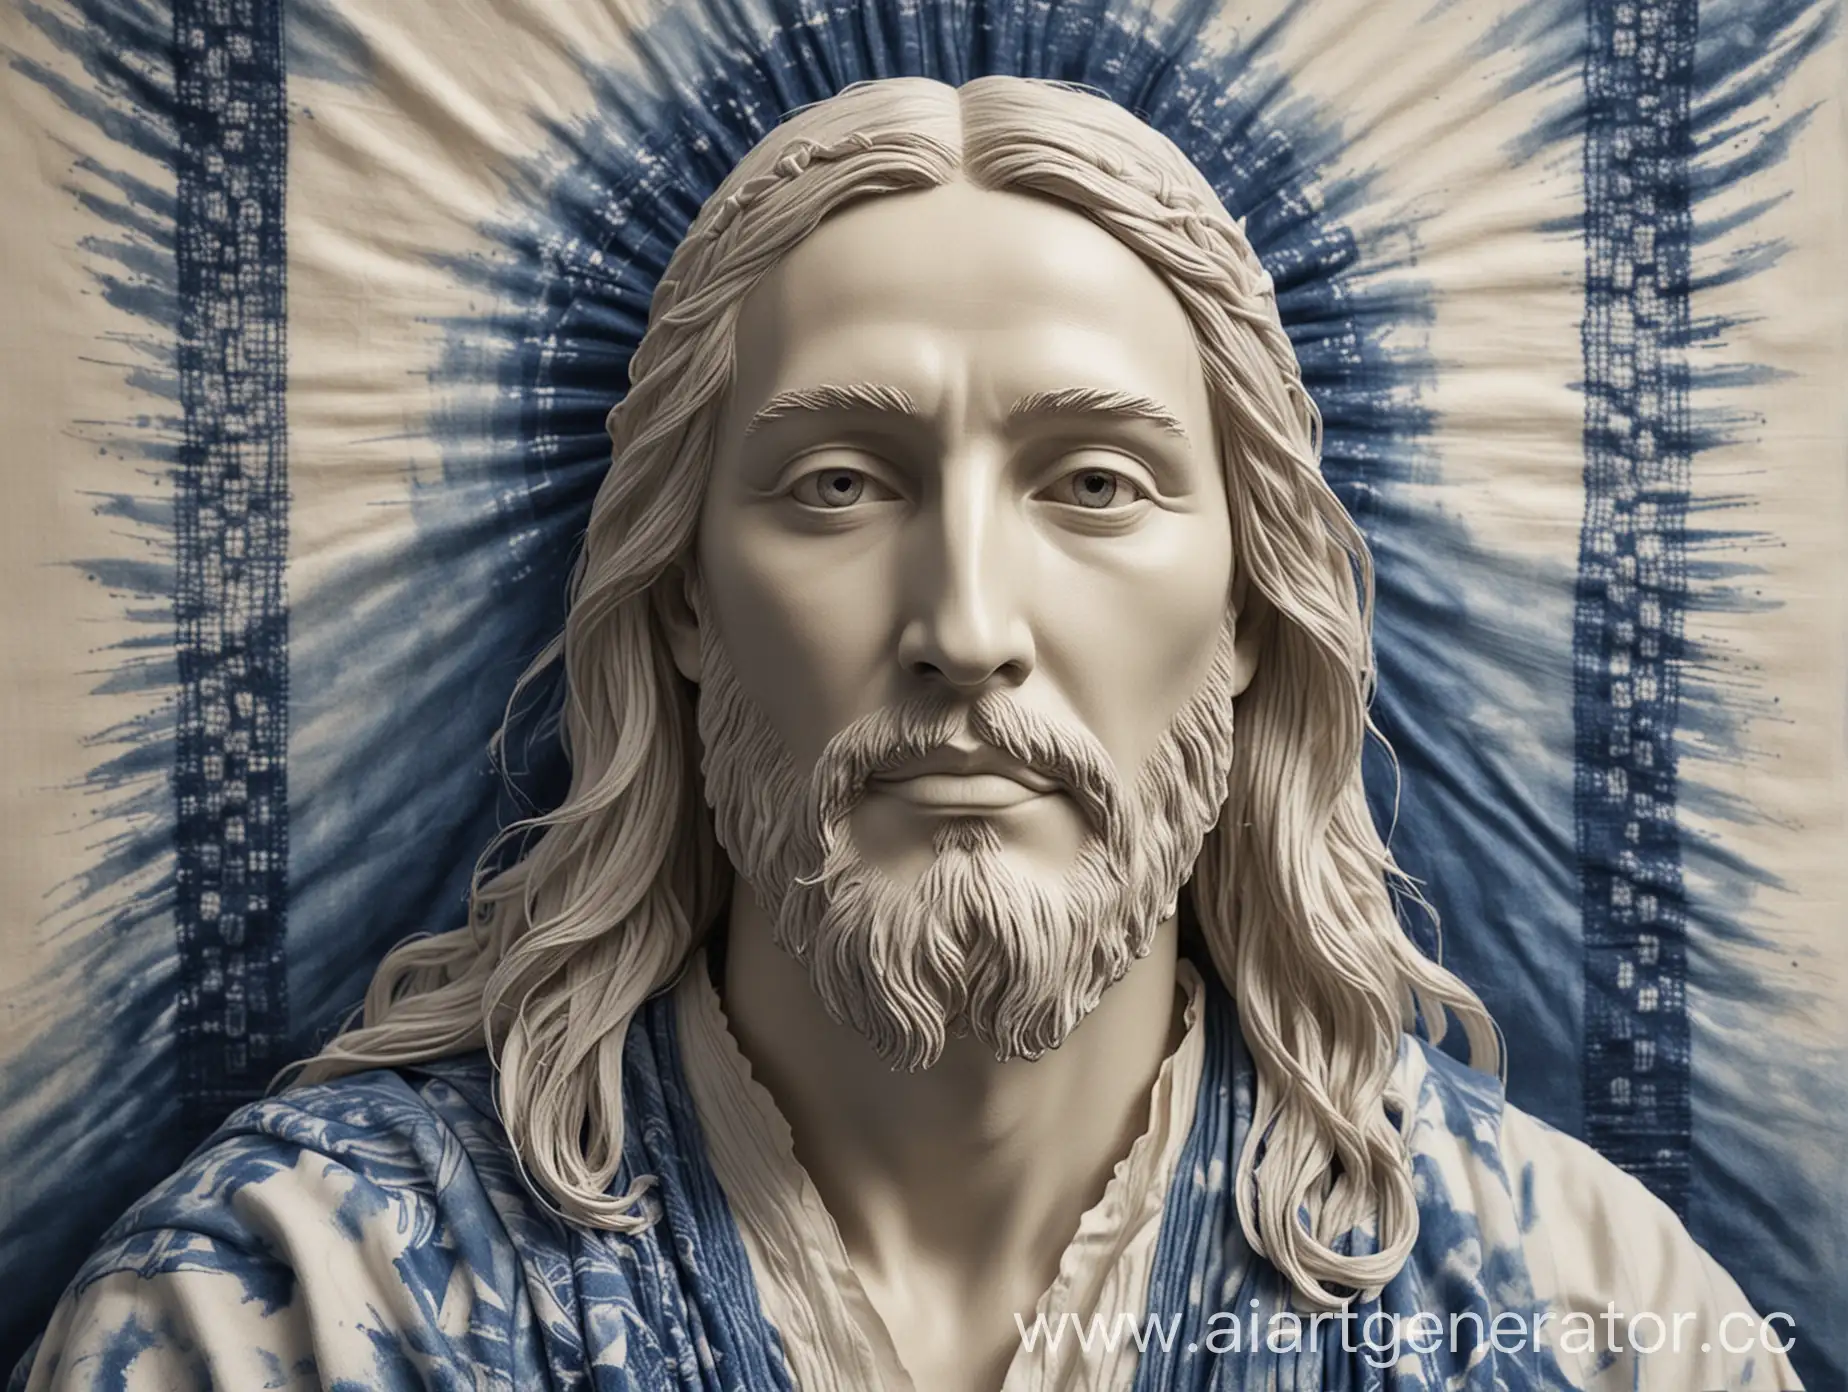 Create an artistic image of Jesus Christ, blending traditional religious iconography with the distinctive Shibori style. The image should depict Jesus with his classic features: serene expression, long hair, and a beard. He should be dressed in flowing robes, which incorporate the intricate patterns and textures characteristic of Shibori fabric dyeing techniques. Use a soft color palette dominated by indigo and white, with subtle variations and gradients to highlight the Shibori patterns. The background should be minimalistic but reflect the Shibori aesthetic, possibly with abstract, tie-dye-like patterns that evoke a sense of peace and spirituality. Ensure that the overall composition is harmonious and captures the sacred and tranquil essence of Jesus in a unique, artistic manner.